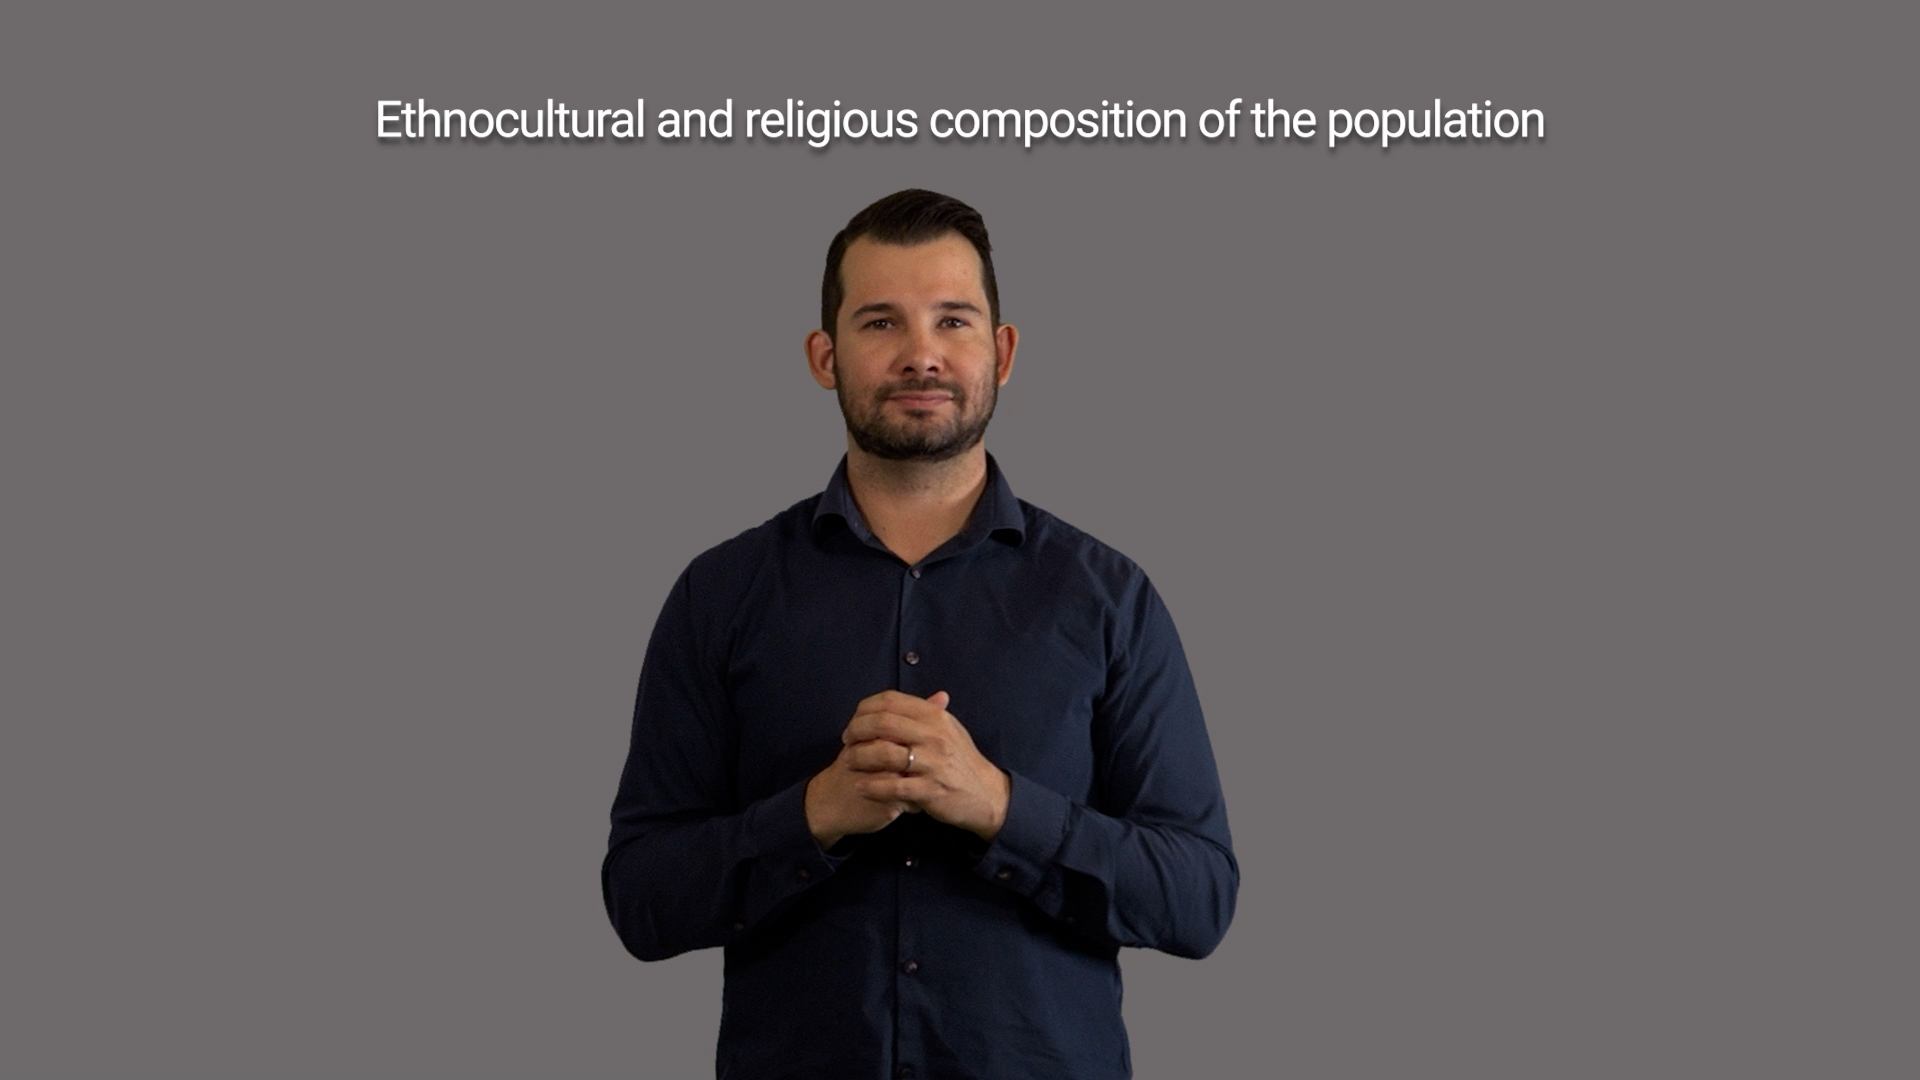 Ethnocultural and religious composition of the population (American Sign Language)